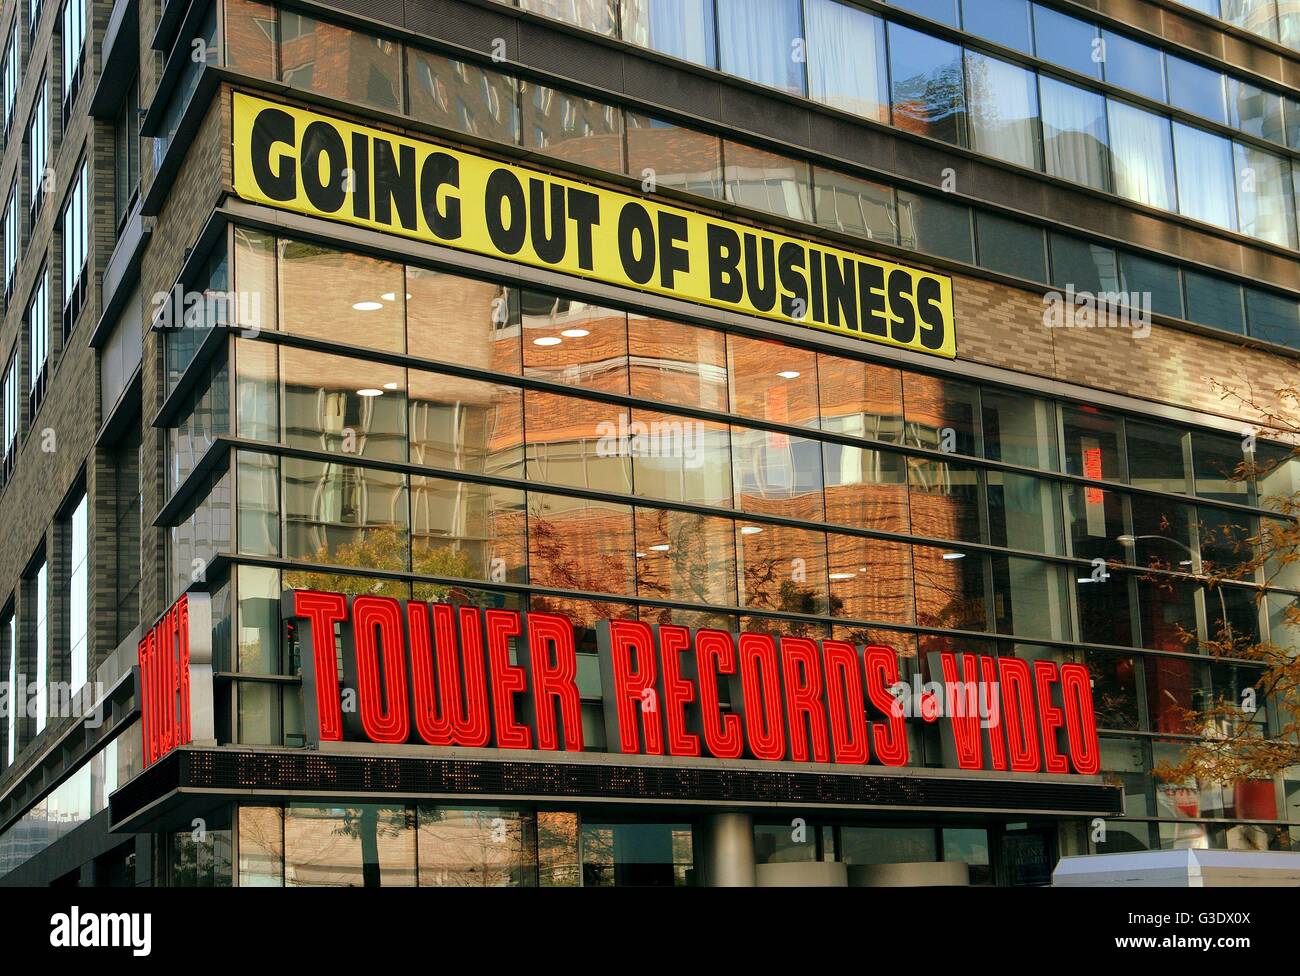 New York City: Tower Records Store with going out of business sign at Broadway and West 67th Street Stock Photo